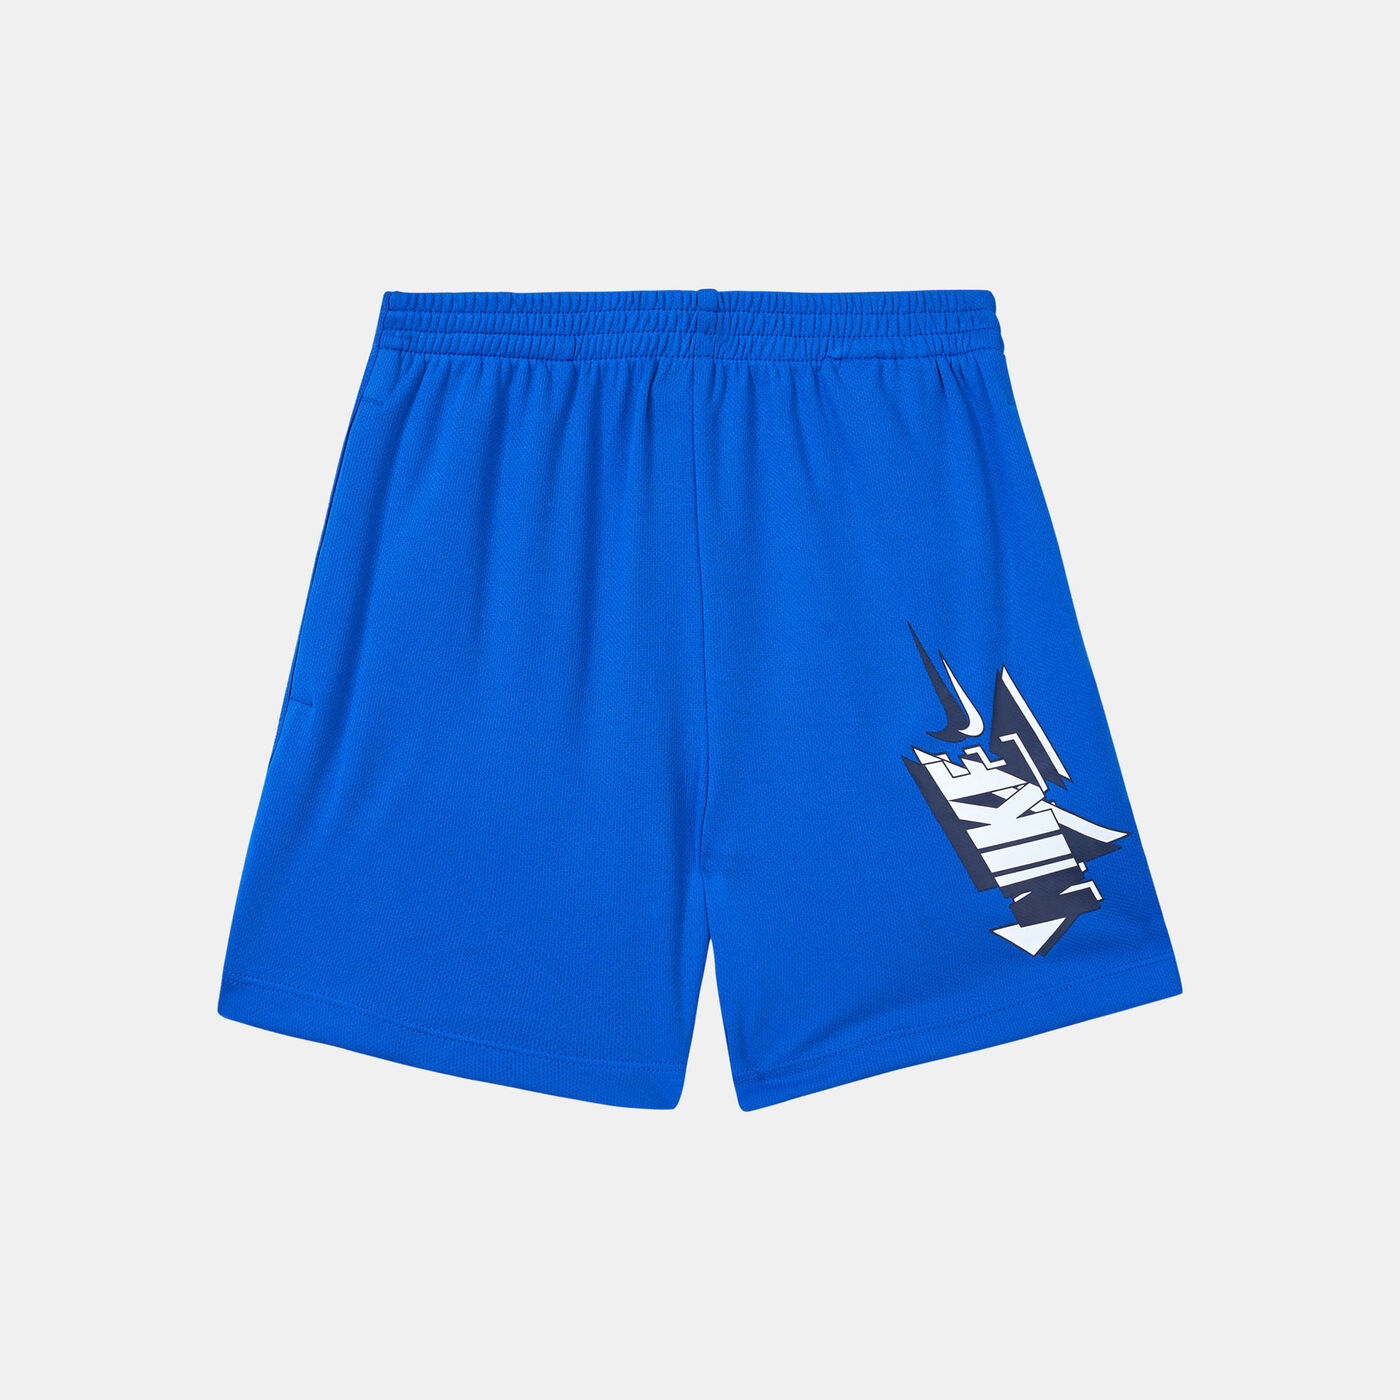 Kids' Dri-FIT Graphic Shorts (Younger Kids)